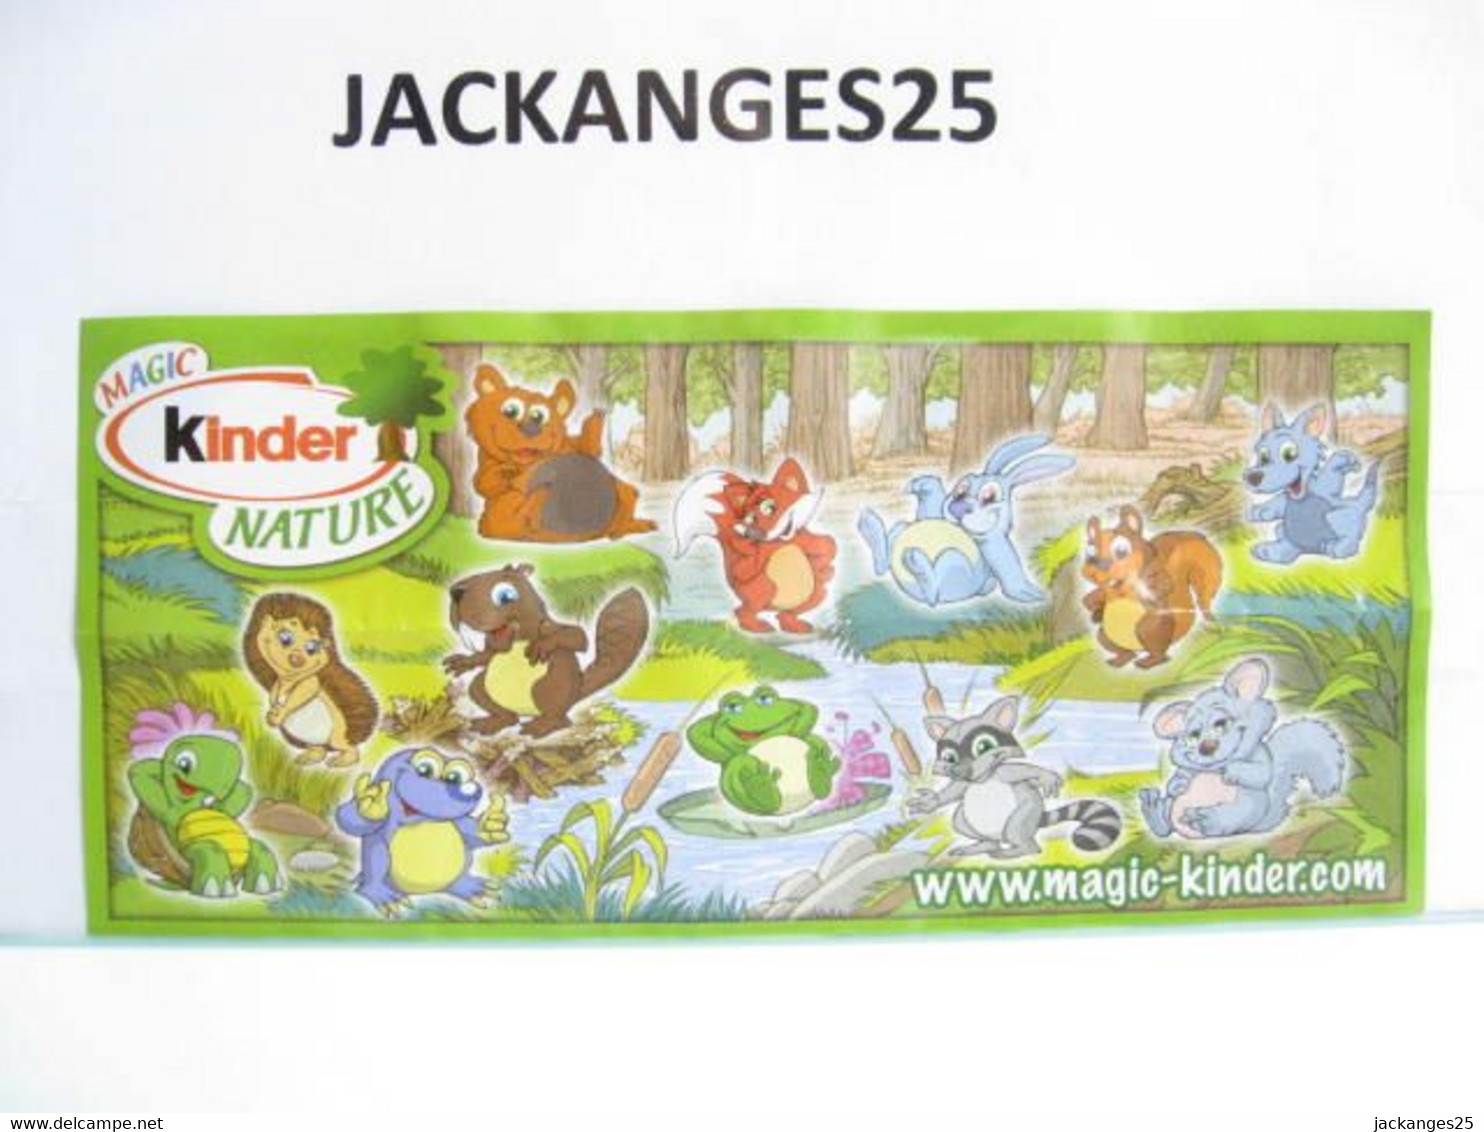 KINDER MPG UN 14 A LOUP ANIMAUX NATURE NATOONS TIERE 2010  2011 + BPZ A NATURE - Familles